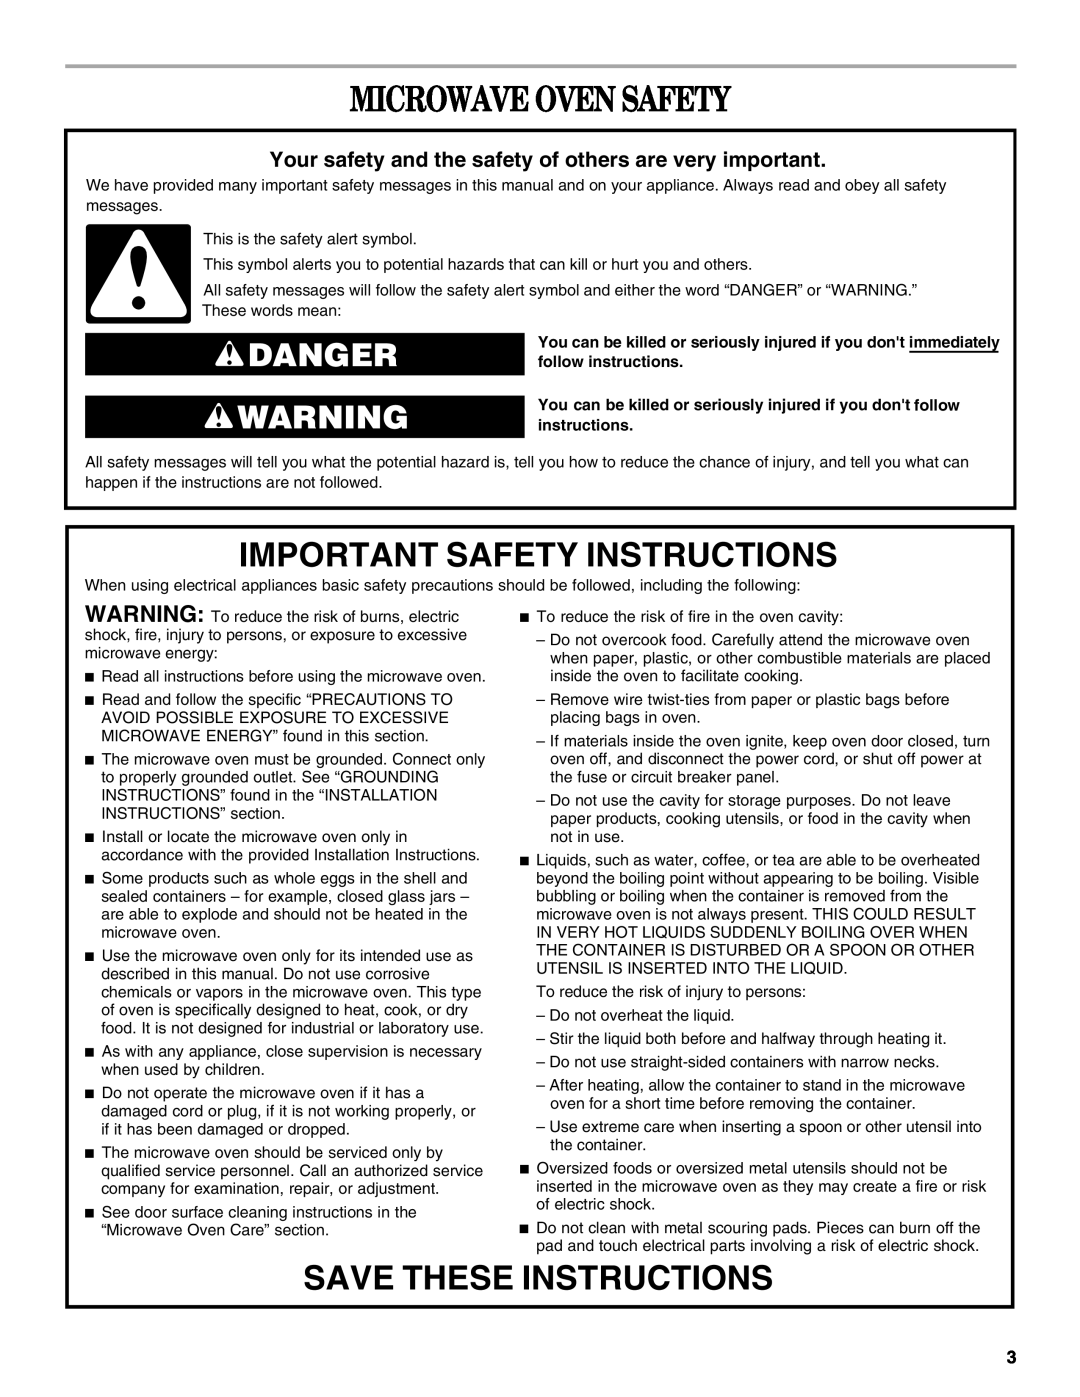 Whirlpool WMC30516AS manual Microwave Oven Safety, Important Safety Instructions, Save These Instructions, Danger 